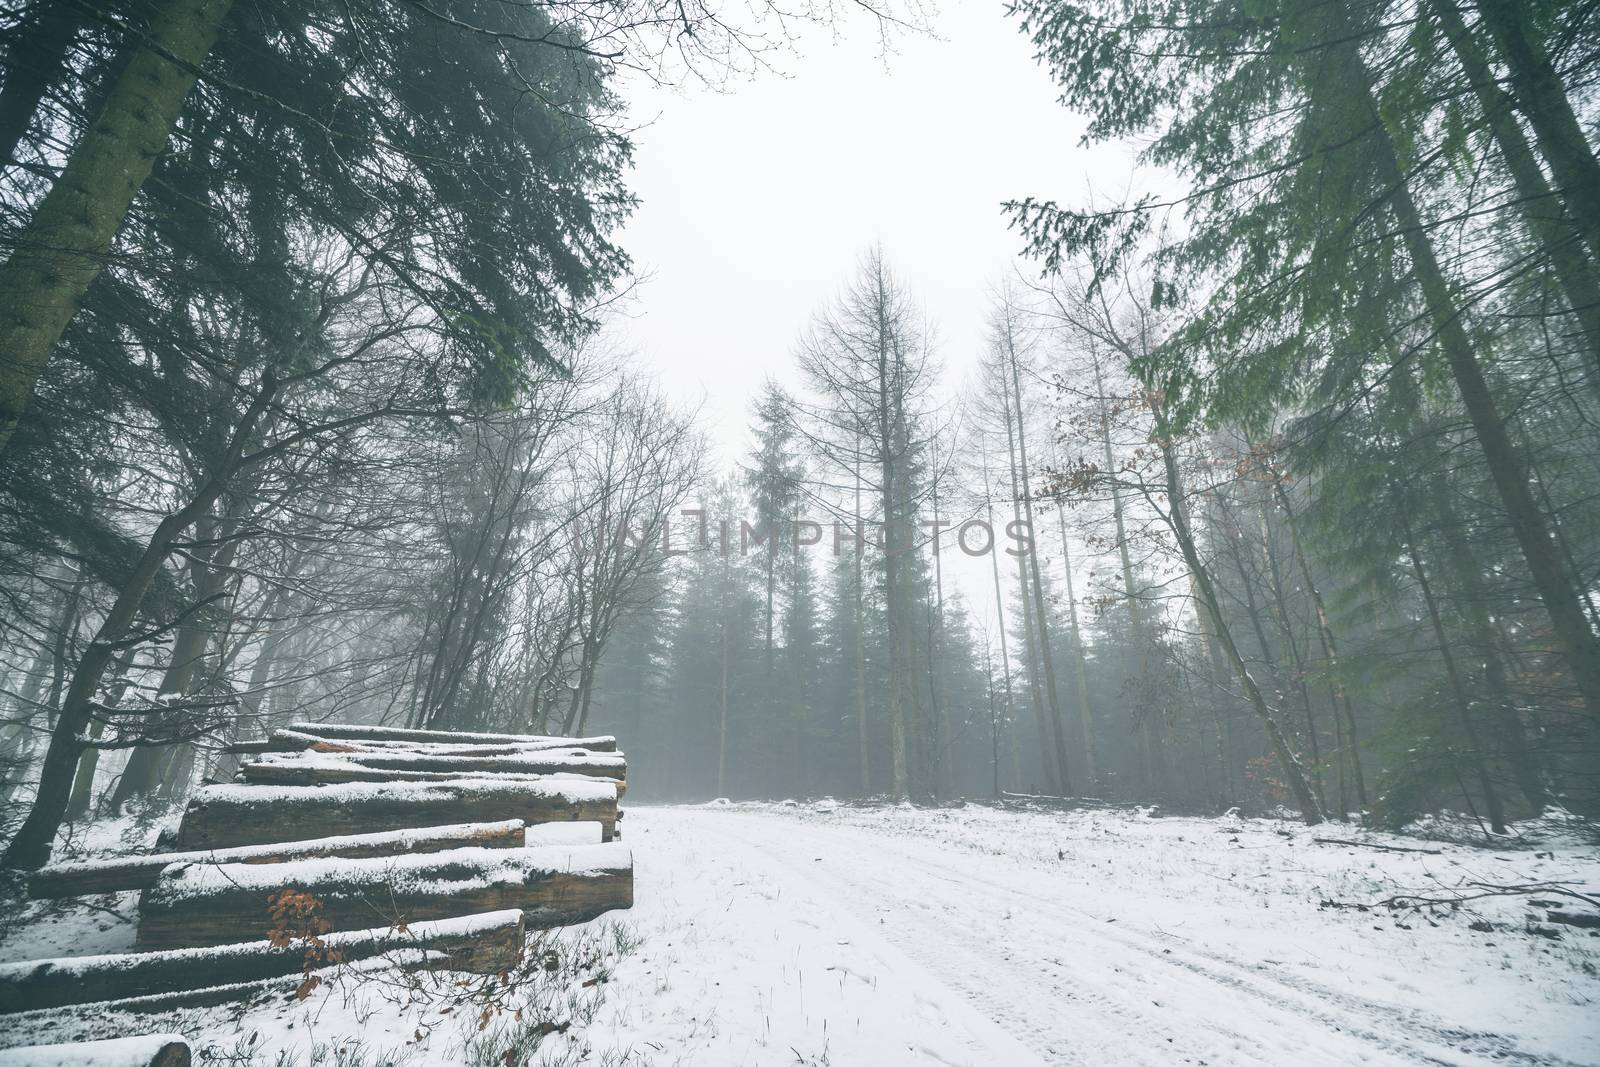 Woodpile in a misty forest with snow by Sportactive